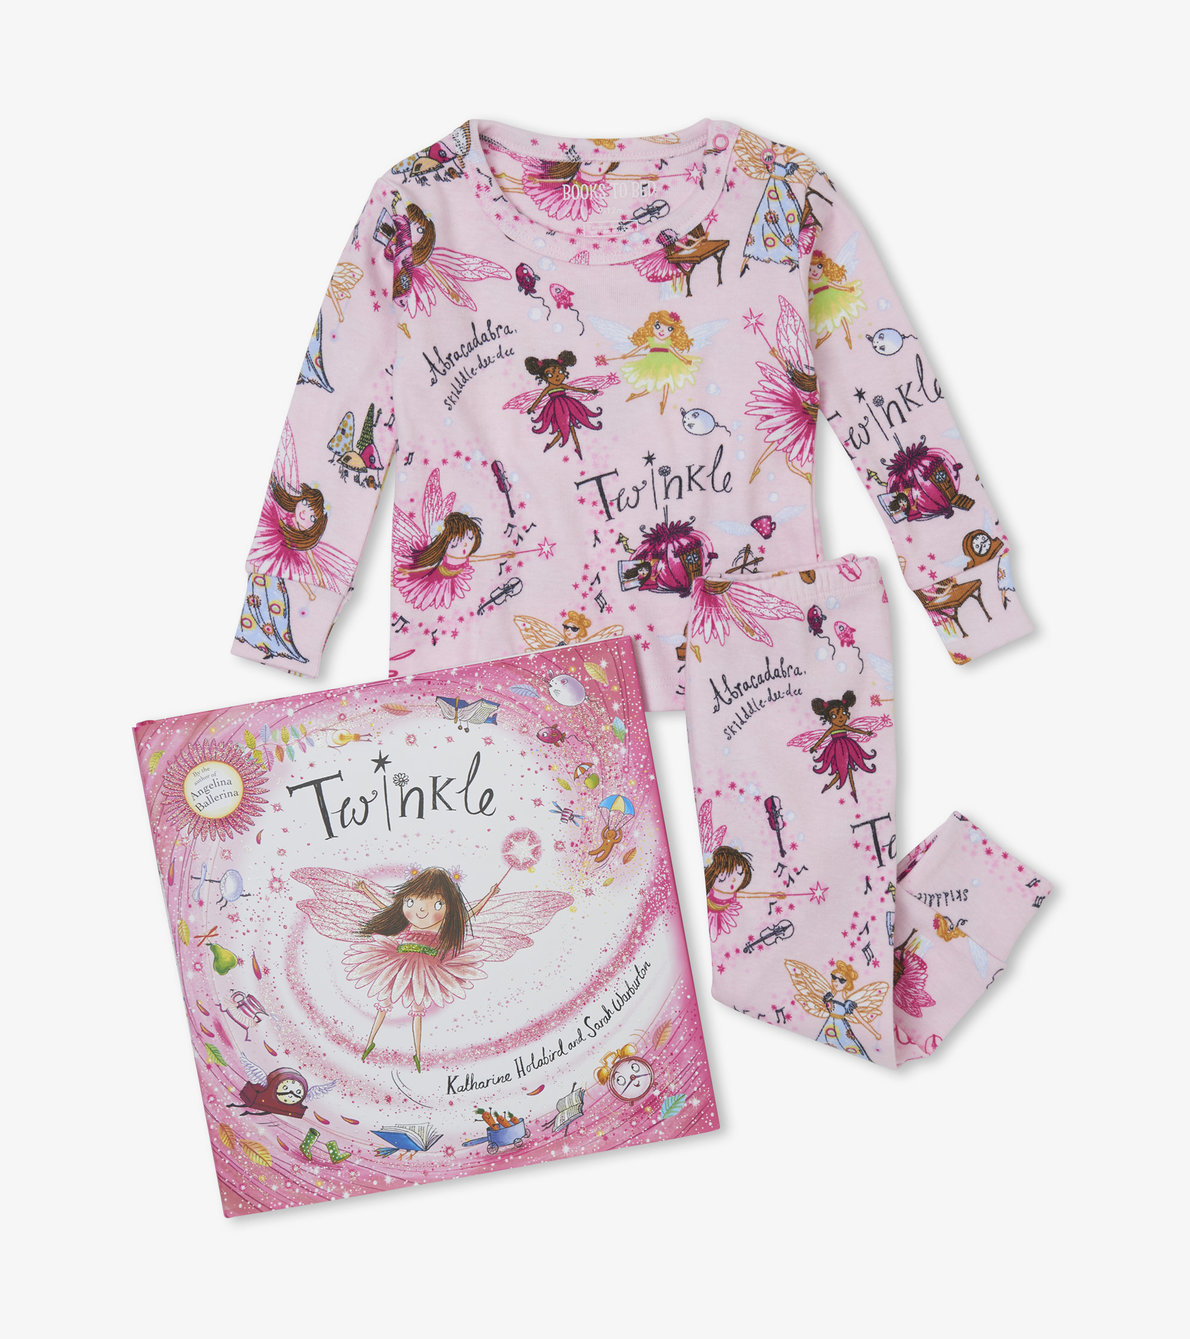 View larger image of Twinkle Book and Infant Pajama Set